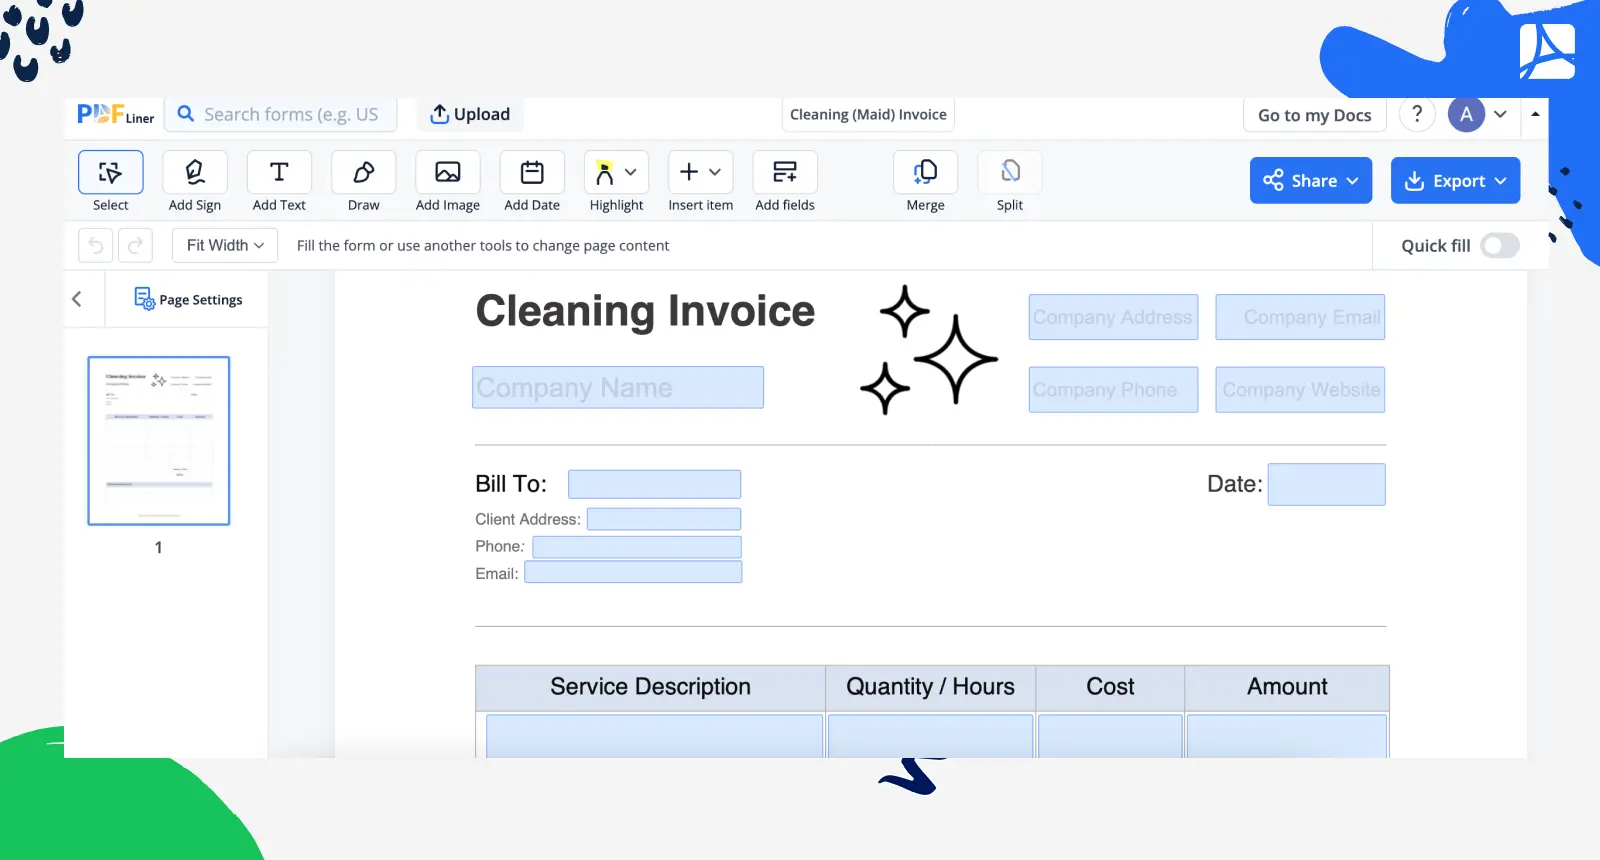 Cleaning (Maid) Invoice screenshot